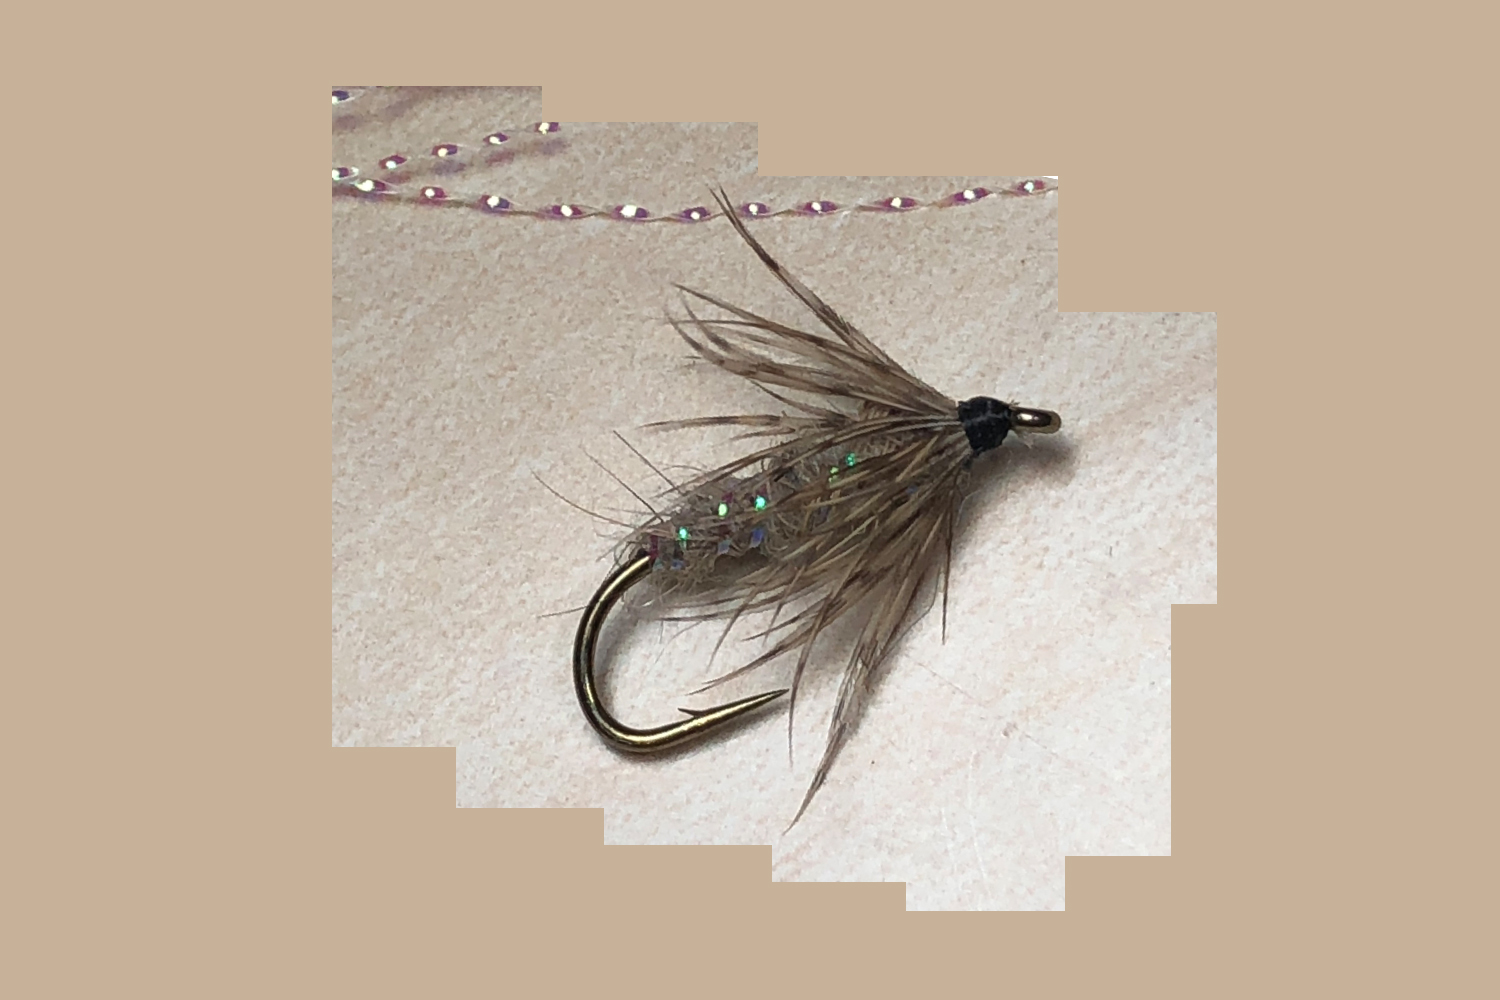 How to Tie a Soft Hackle Hares Ear [Video Tutorial] - Wet Fly Swing